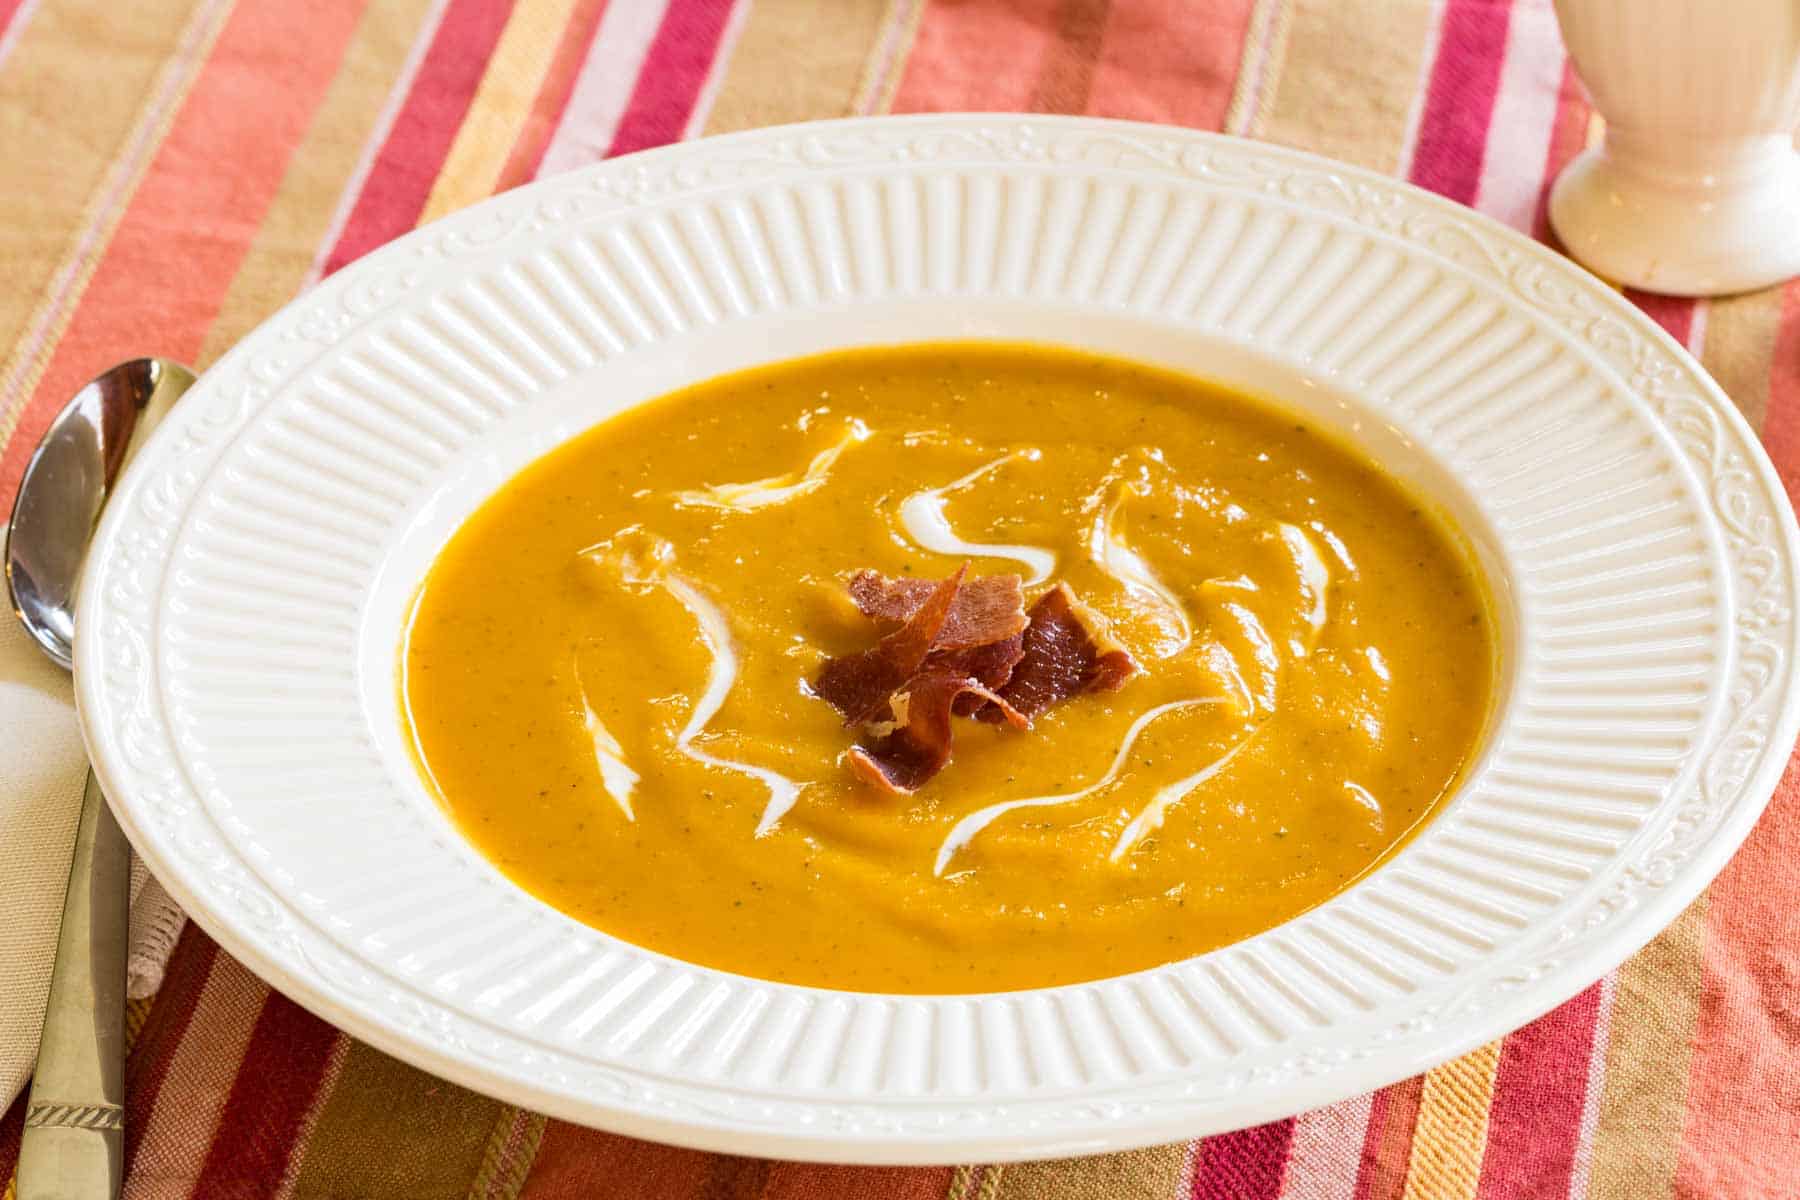 bowl of butternut squash soup garnished with crispy prosciutto next to a spoon and a cloth napkin on a striped placemat